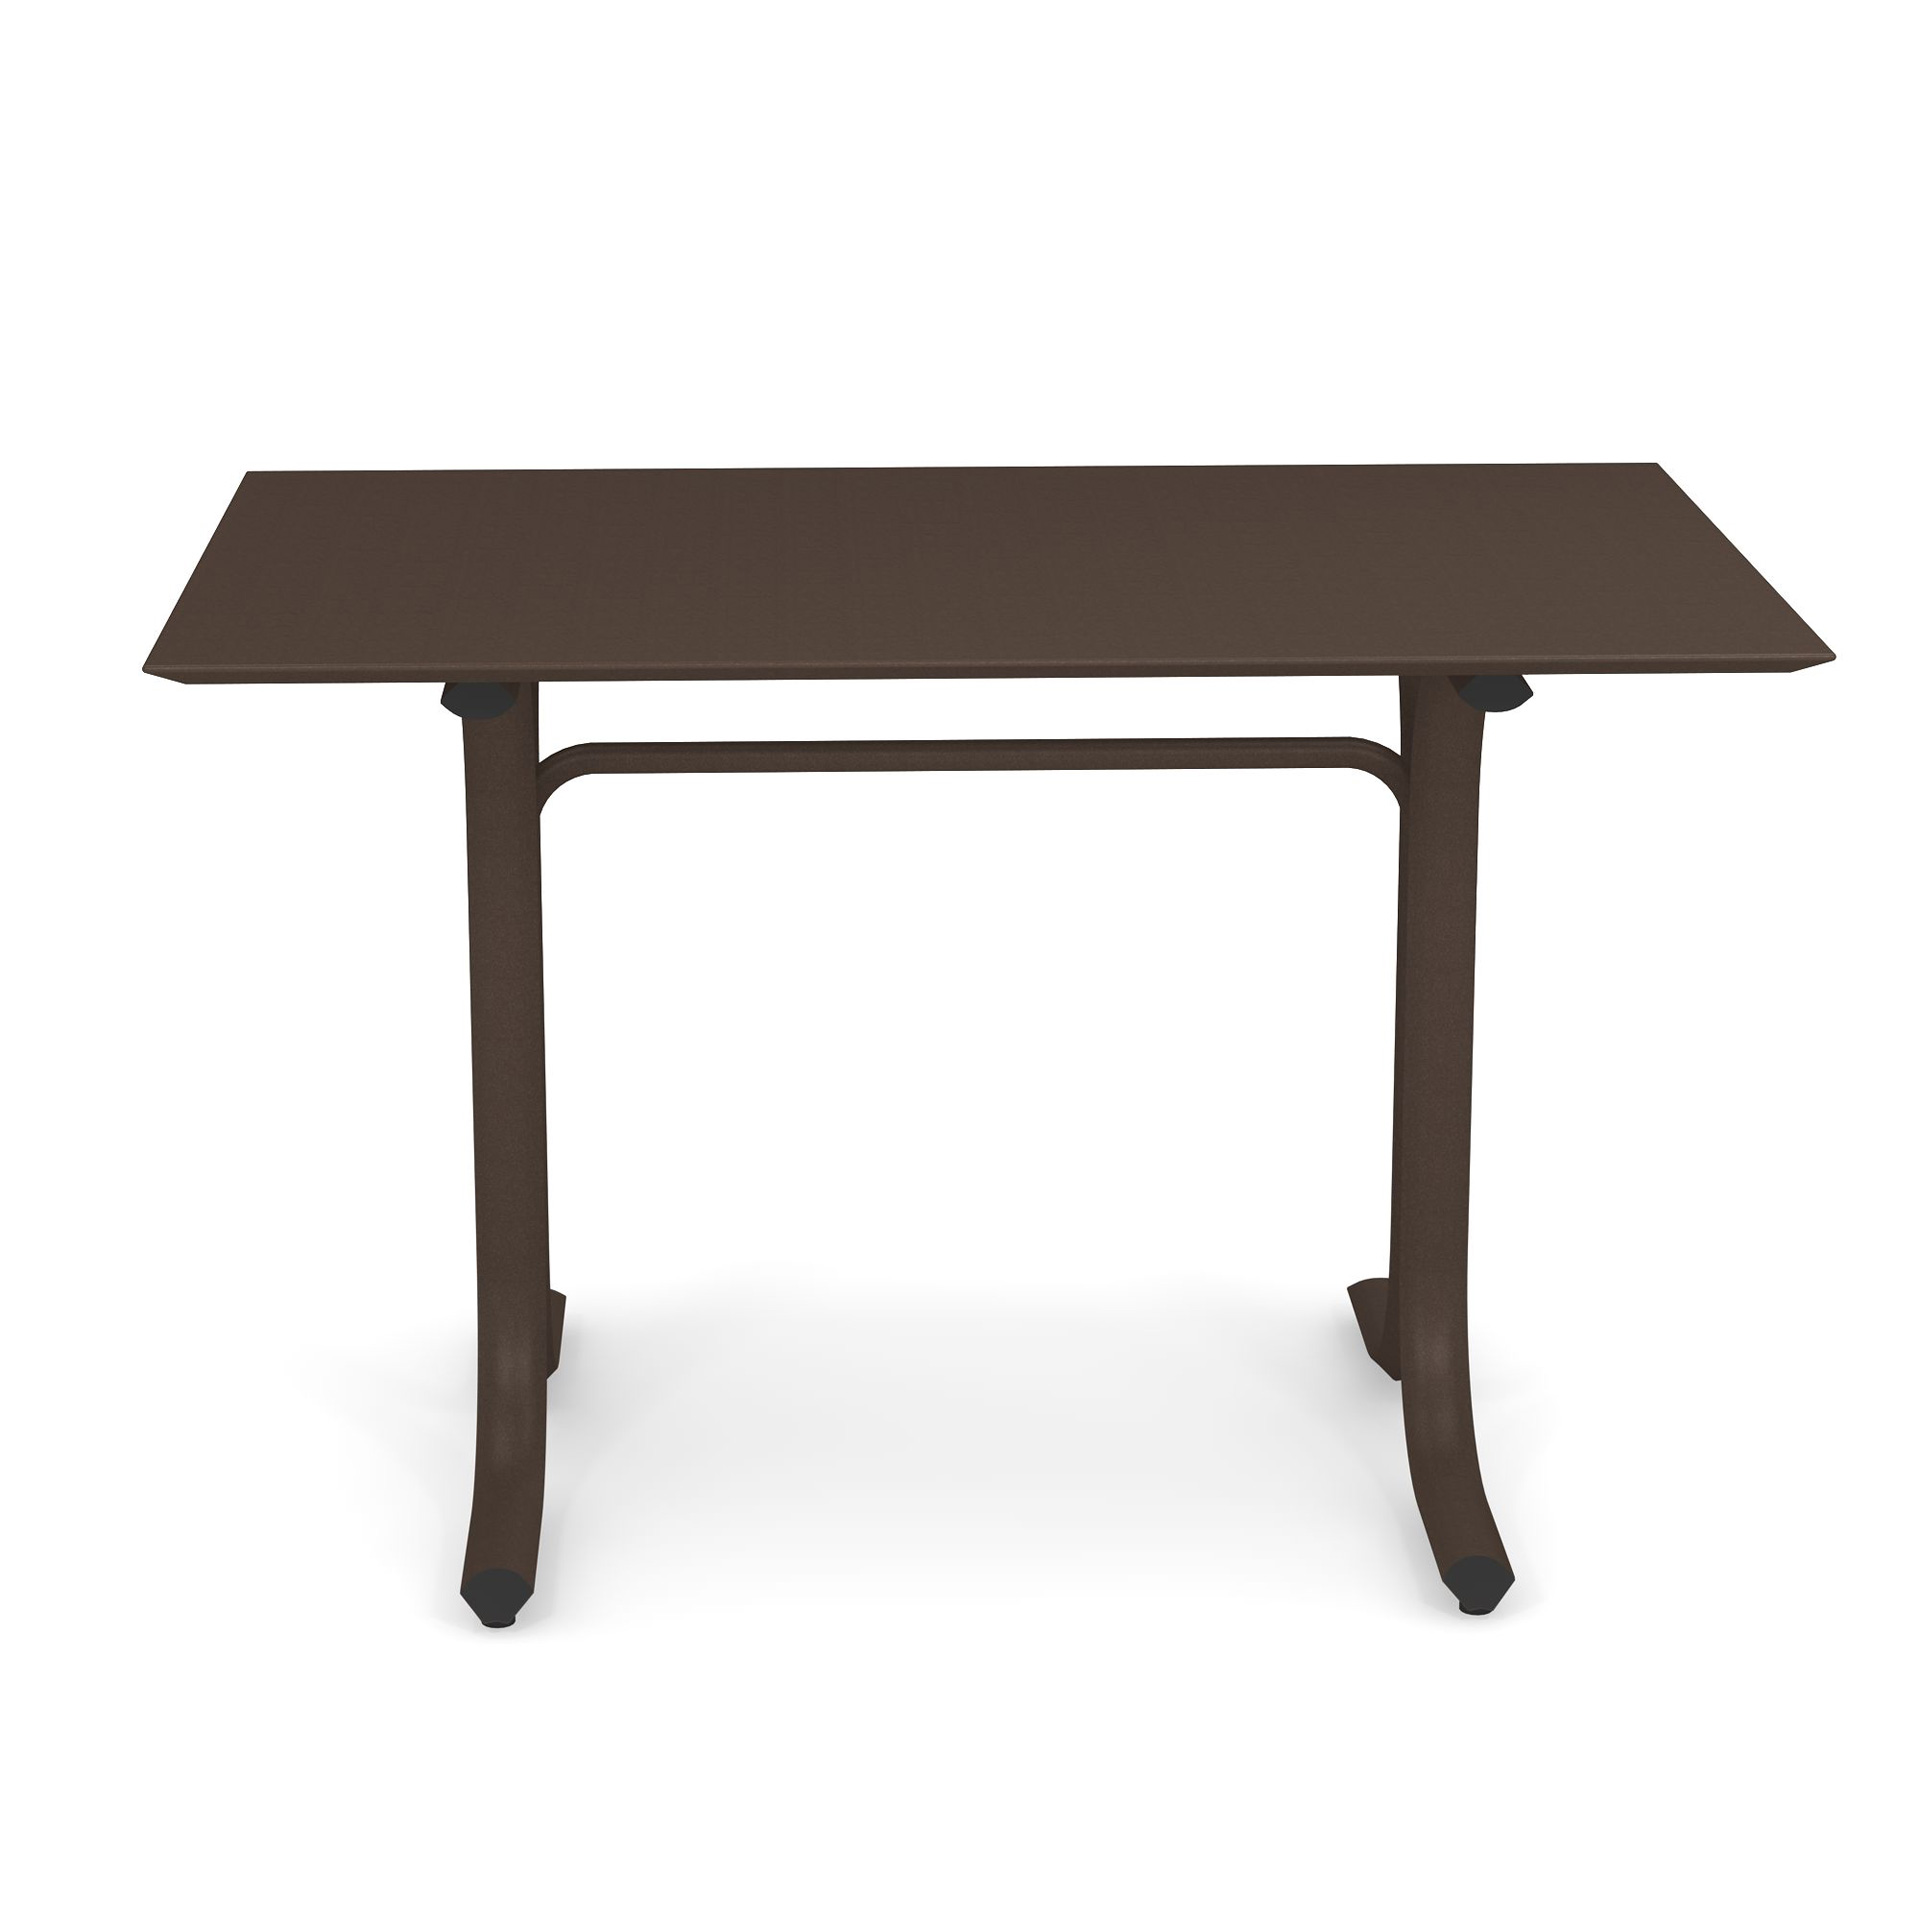 Table System 1163